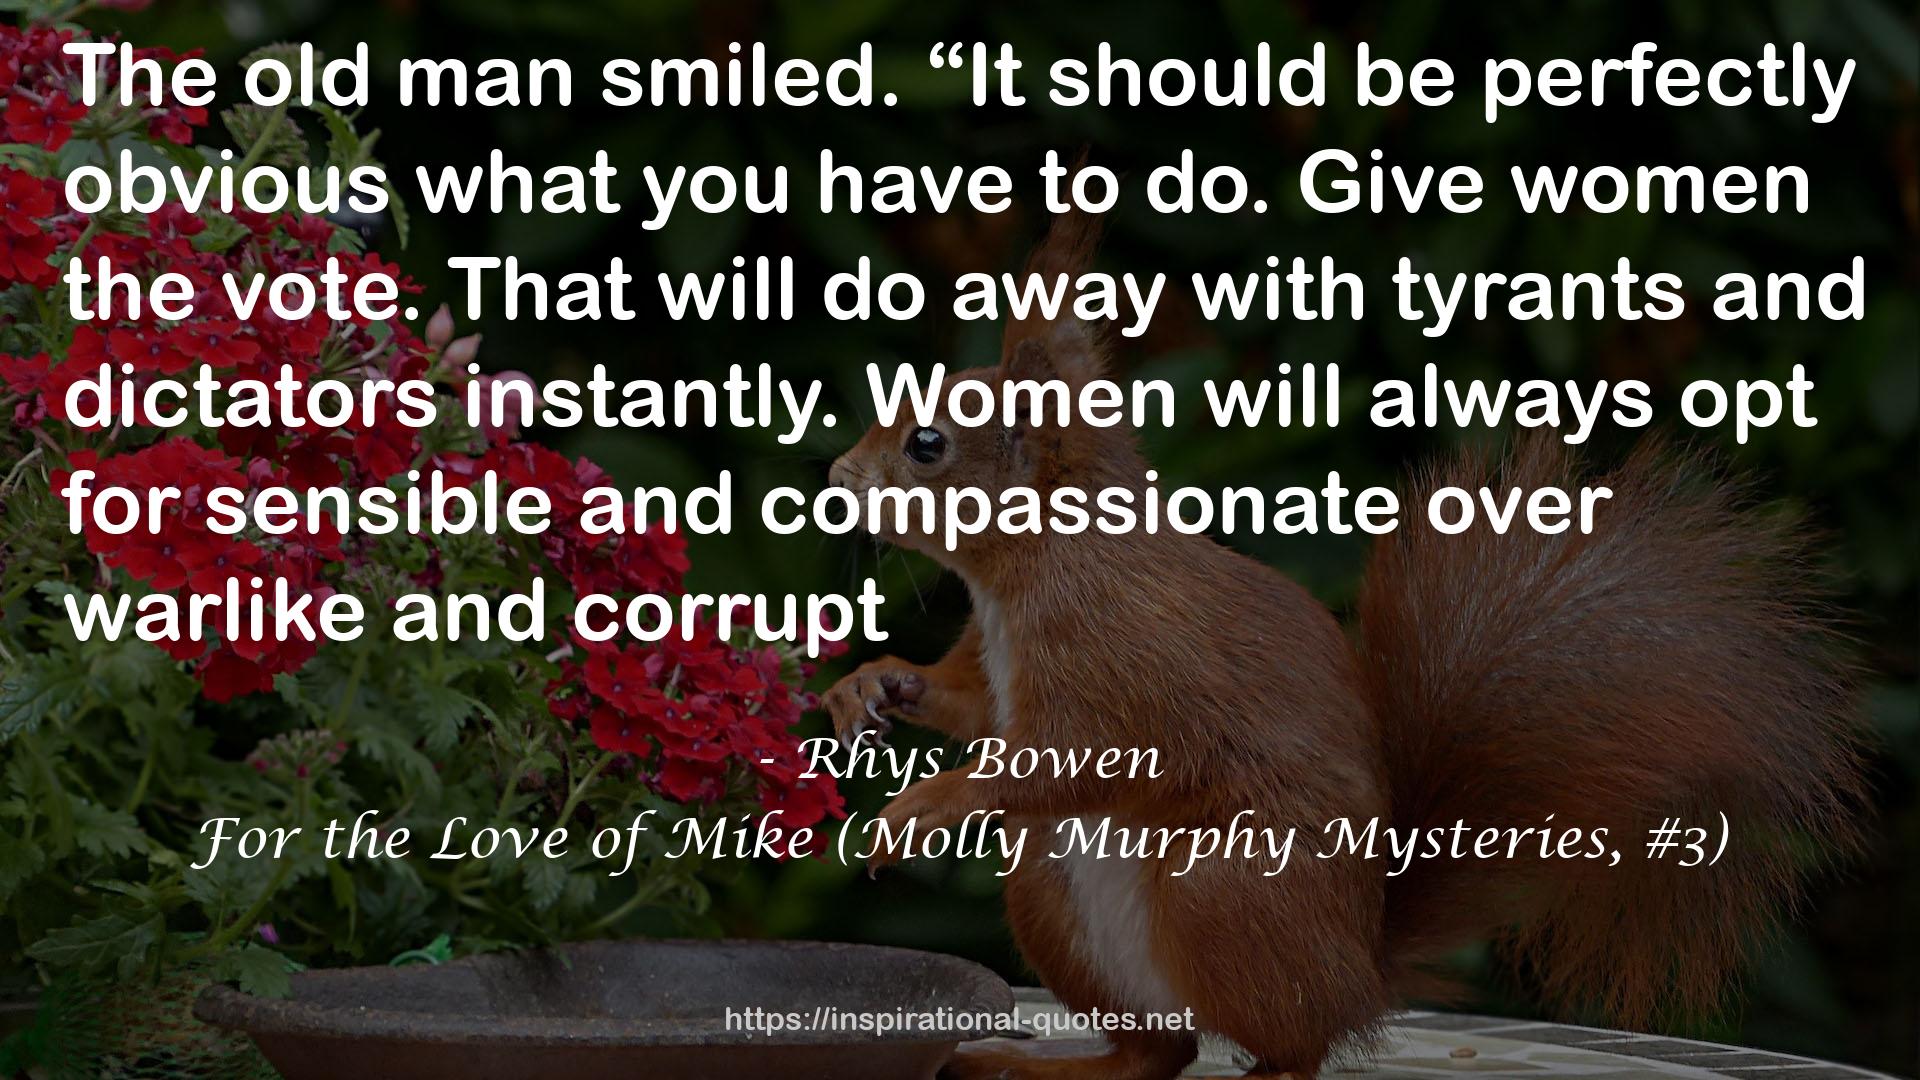 For the Love of Mike (Molly Murphy Mysteries, #3) QUOTES